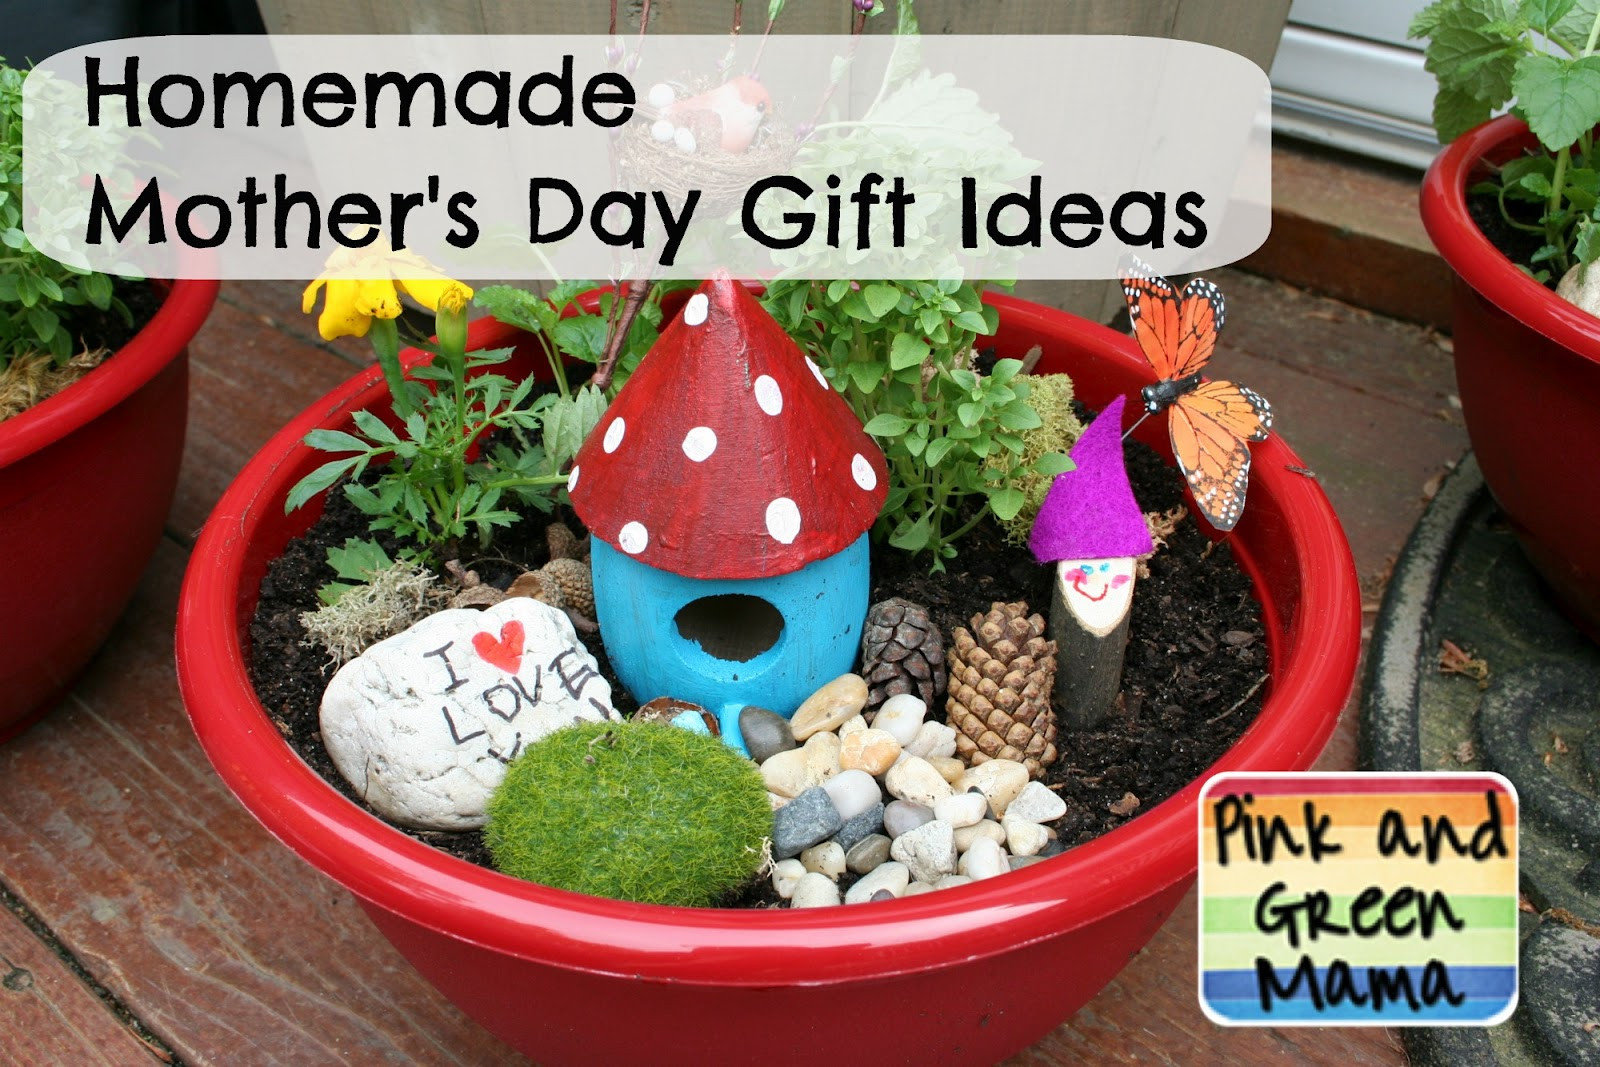 Making Mothers Day Gifts
 Pink and Green Mama Homemade Mother s Day Gift Ideas